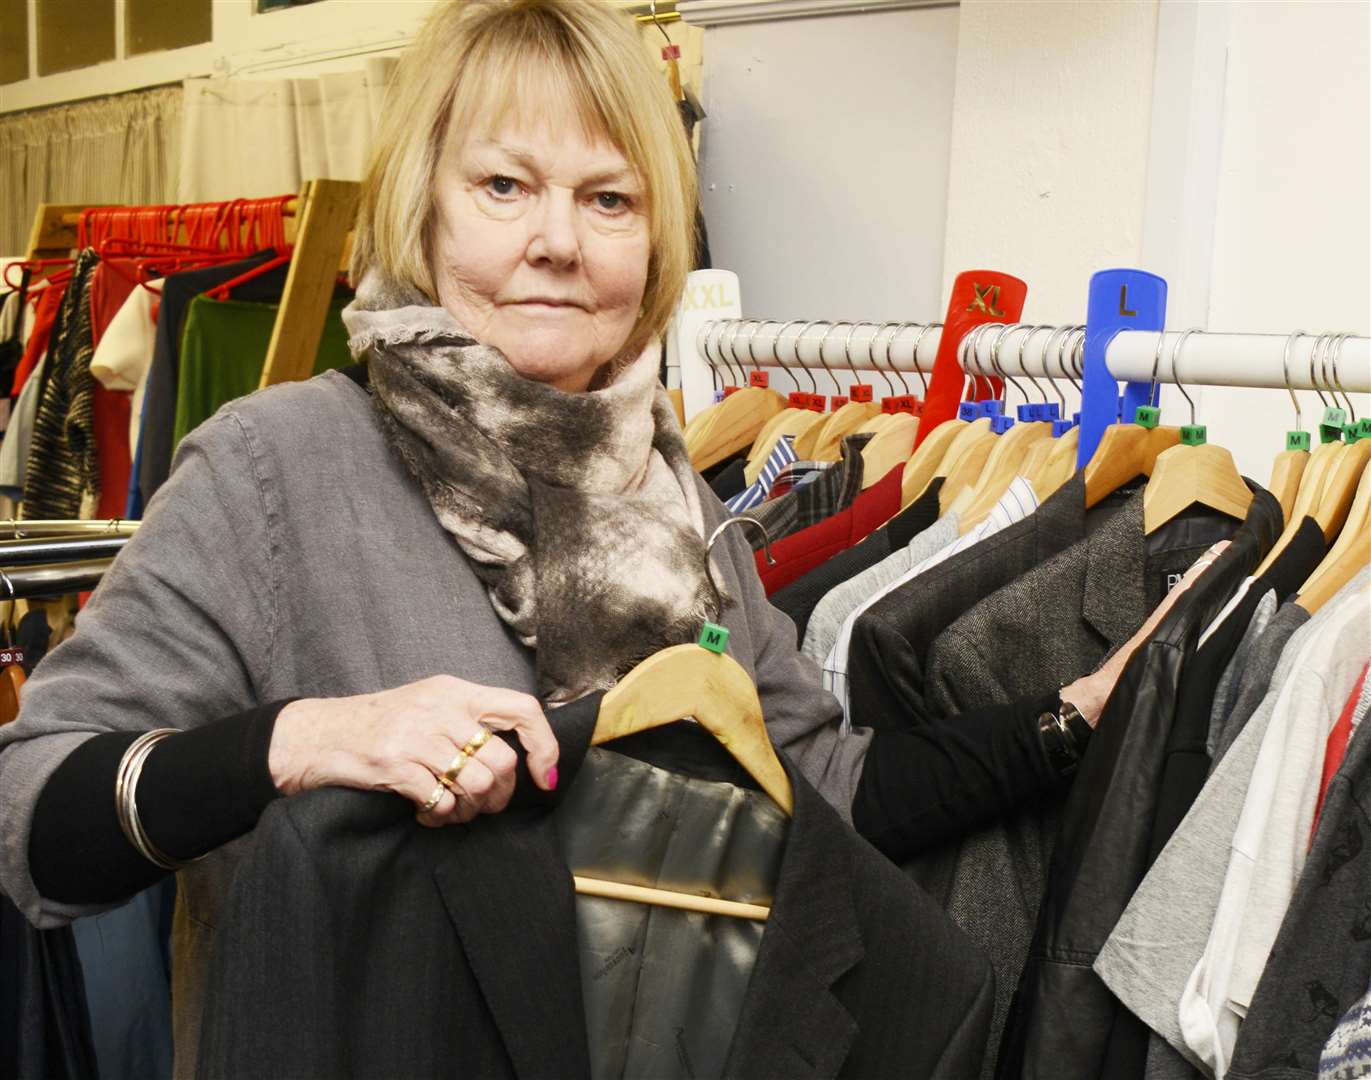 Brenda, a volunteer at Relate Charity shop, replacing a coat that was taken. Picture: Paul Amos